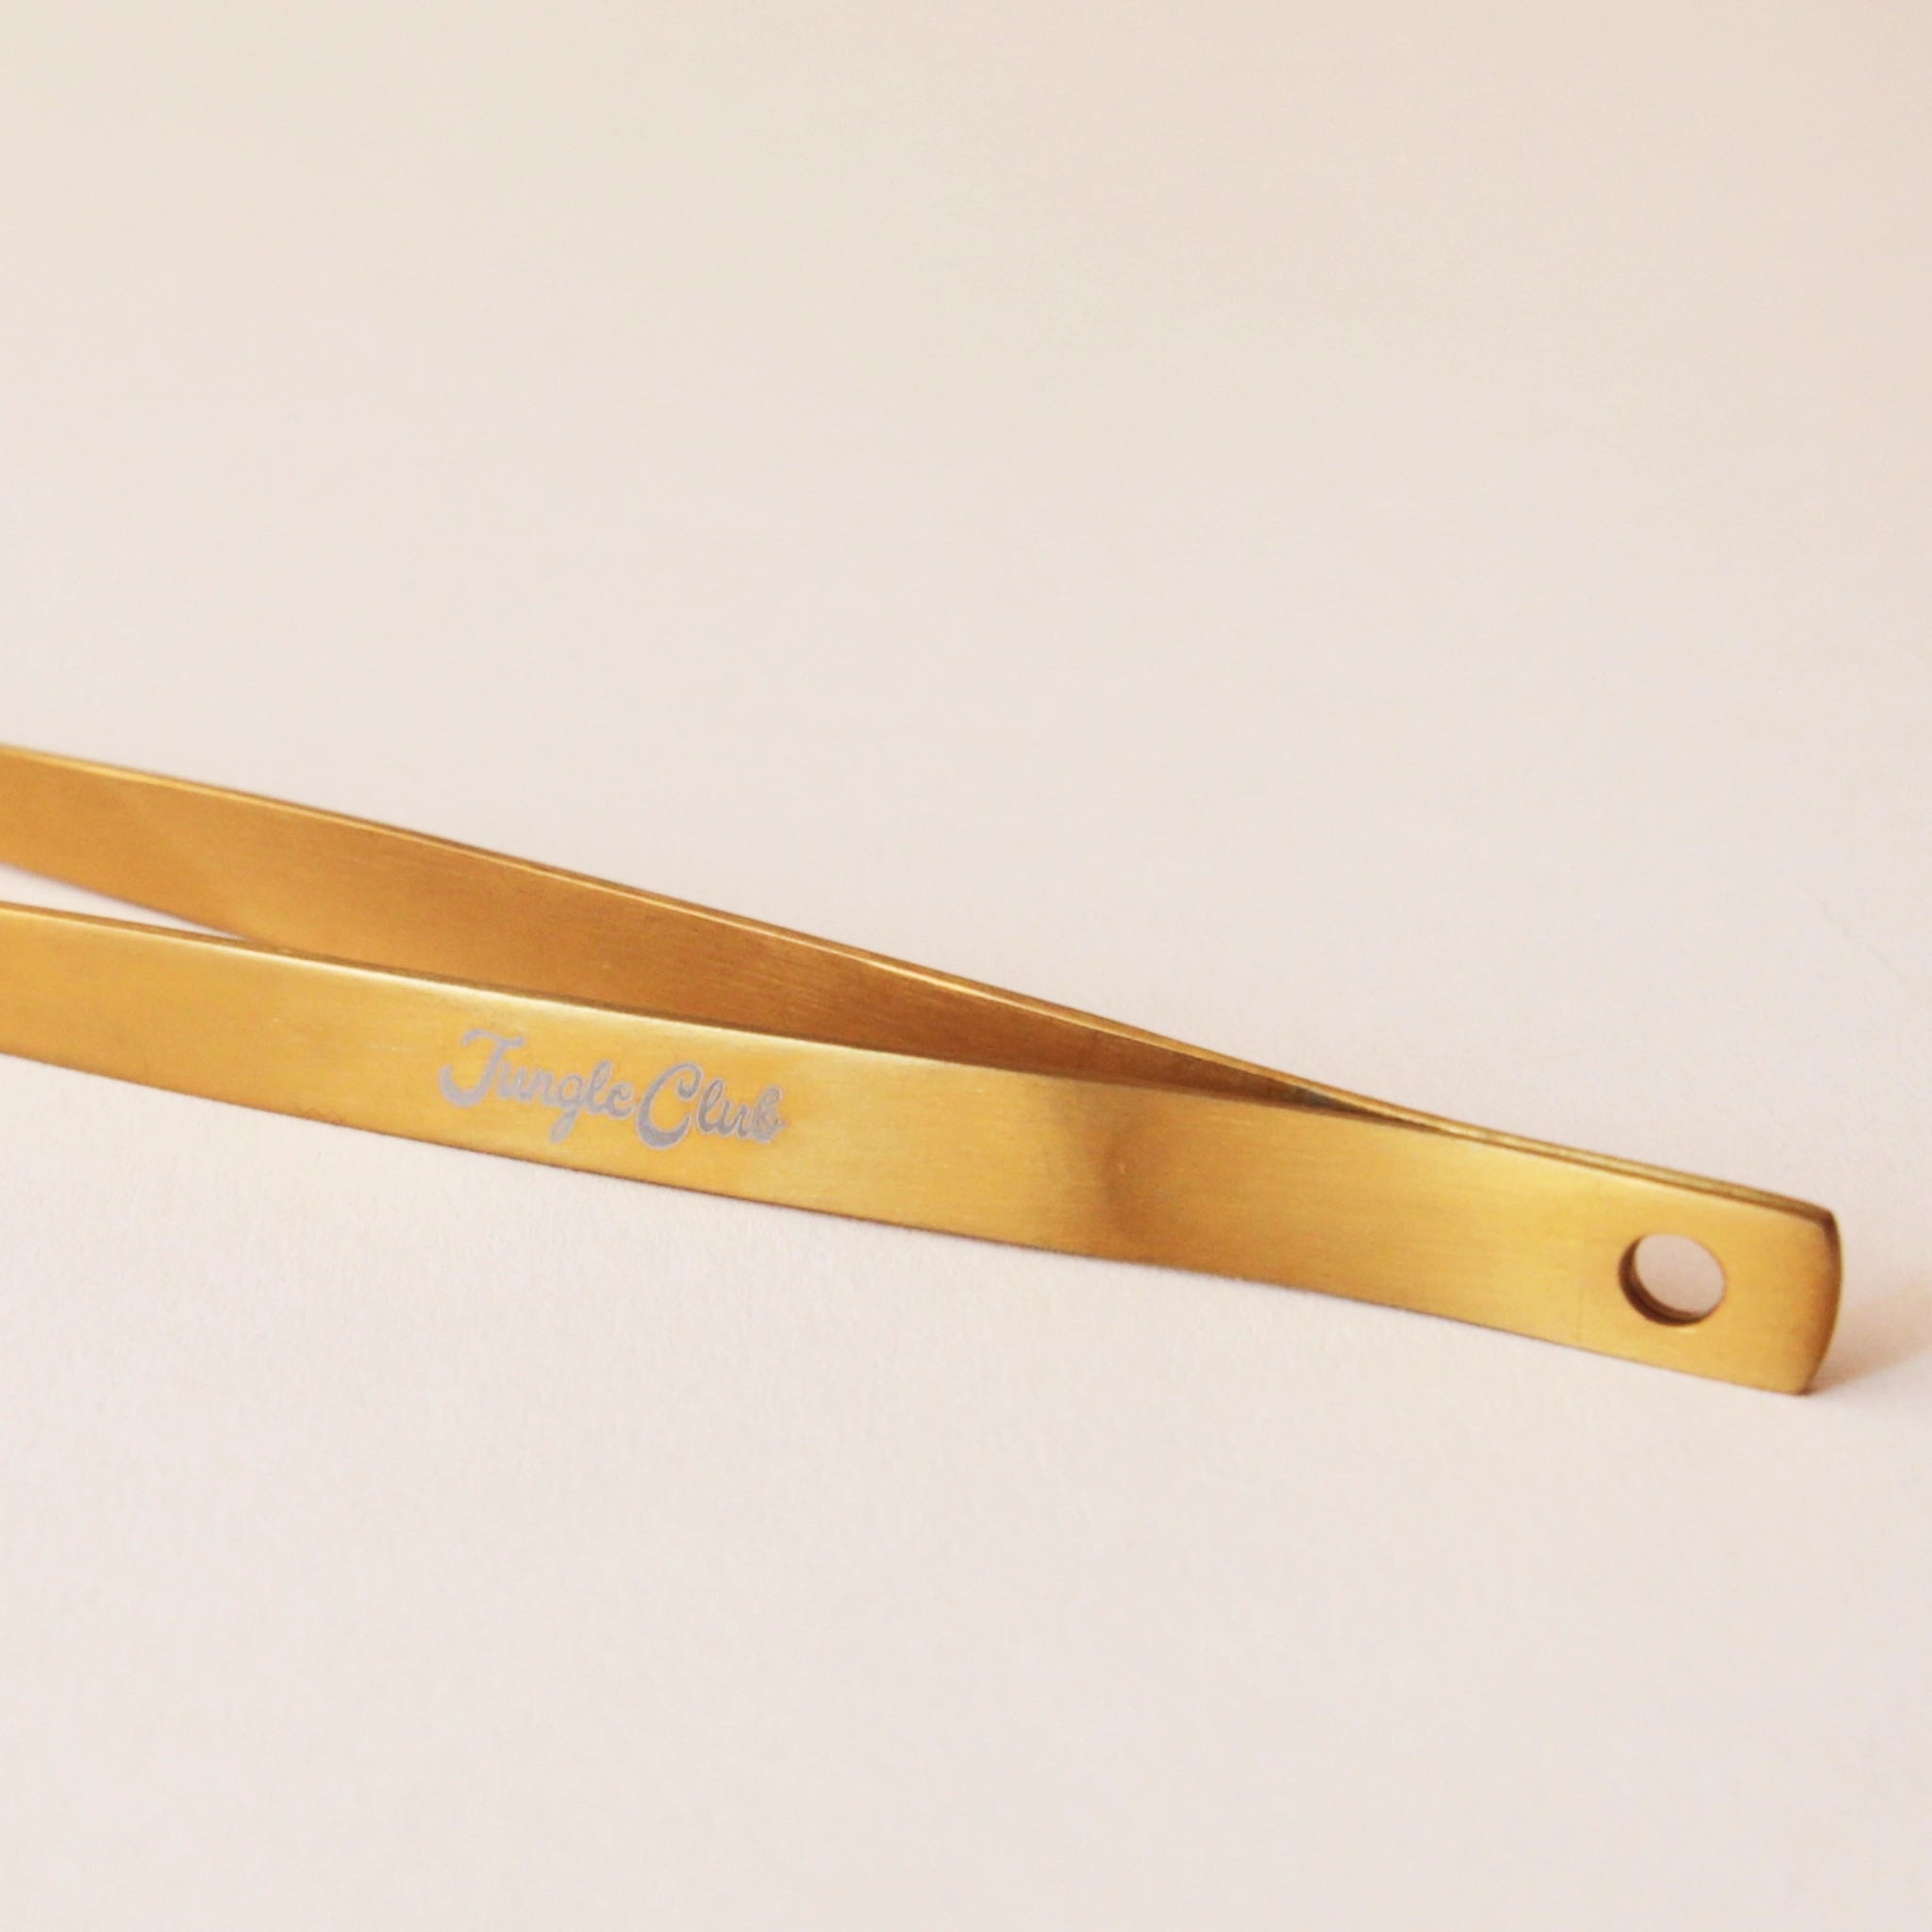 Brass tweezers with a slim design and a pointed tip perfect for handling spiky cacti. On the side of the tweezer there is text that reads, &quot;Jungle Club&quot; I white cursive.